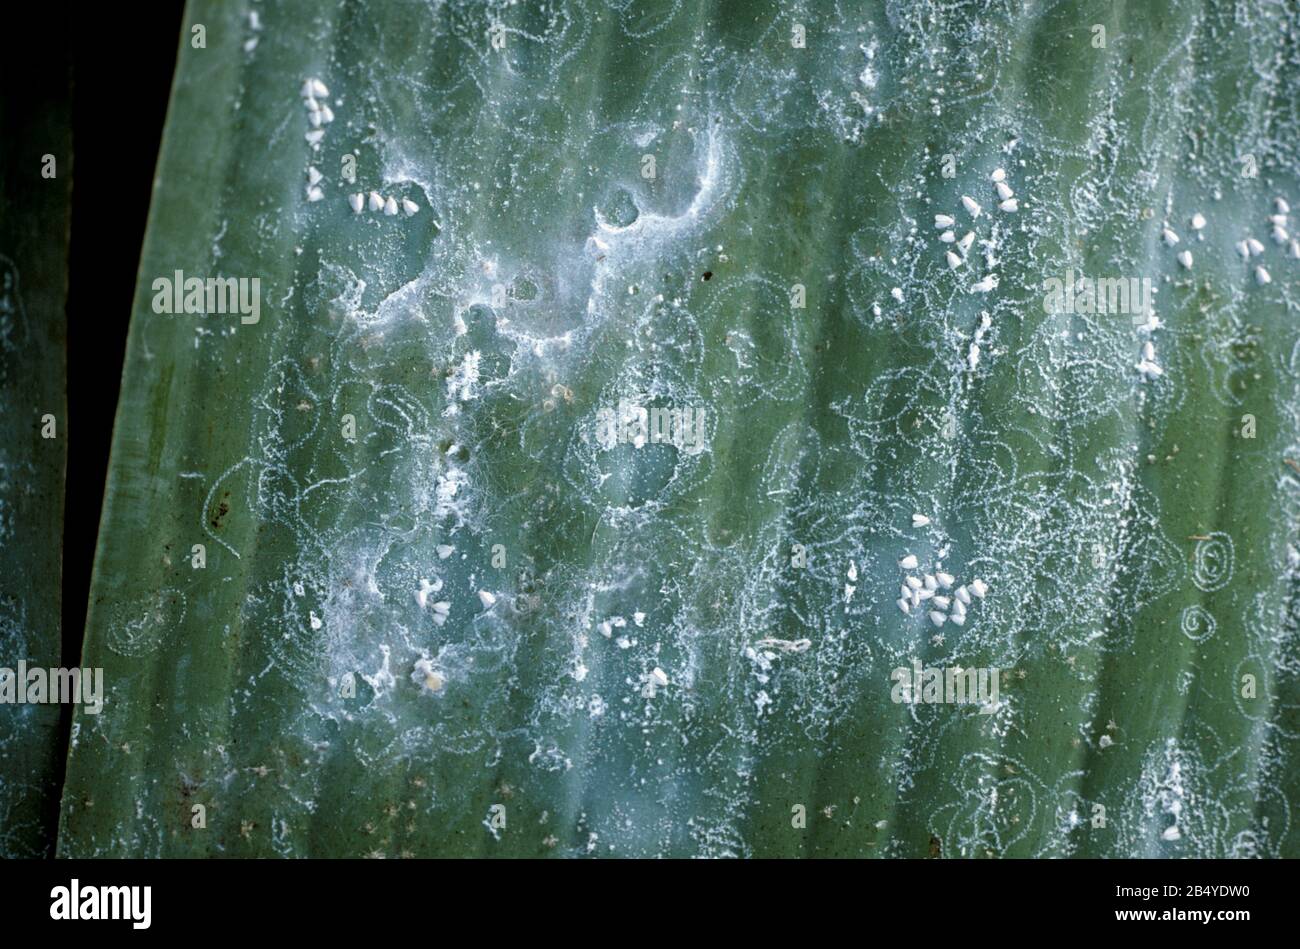 Spiralling whitefly (Aleurodicus dispersus) adults and circular wax trails on the underside of a banana leaf, Mindanao, Philippines, February Stock Photo